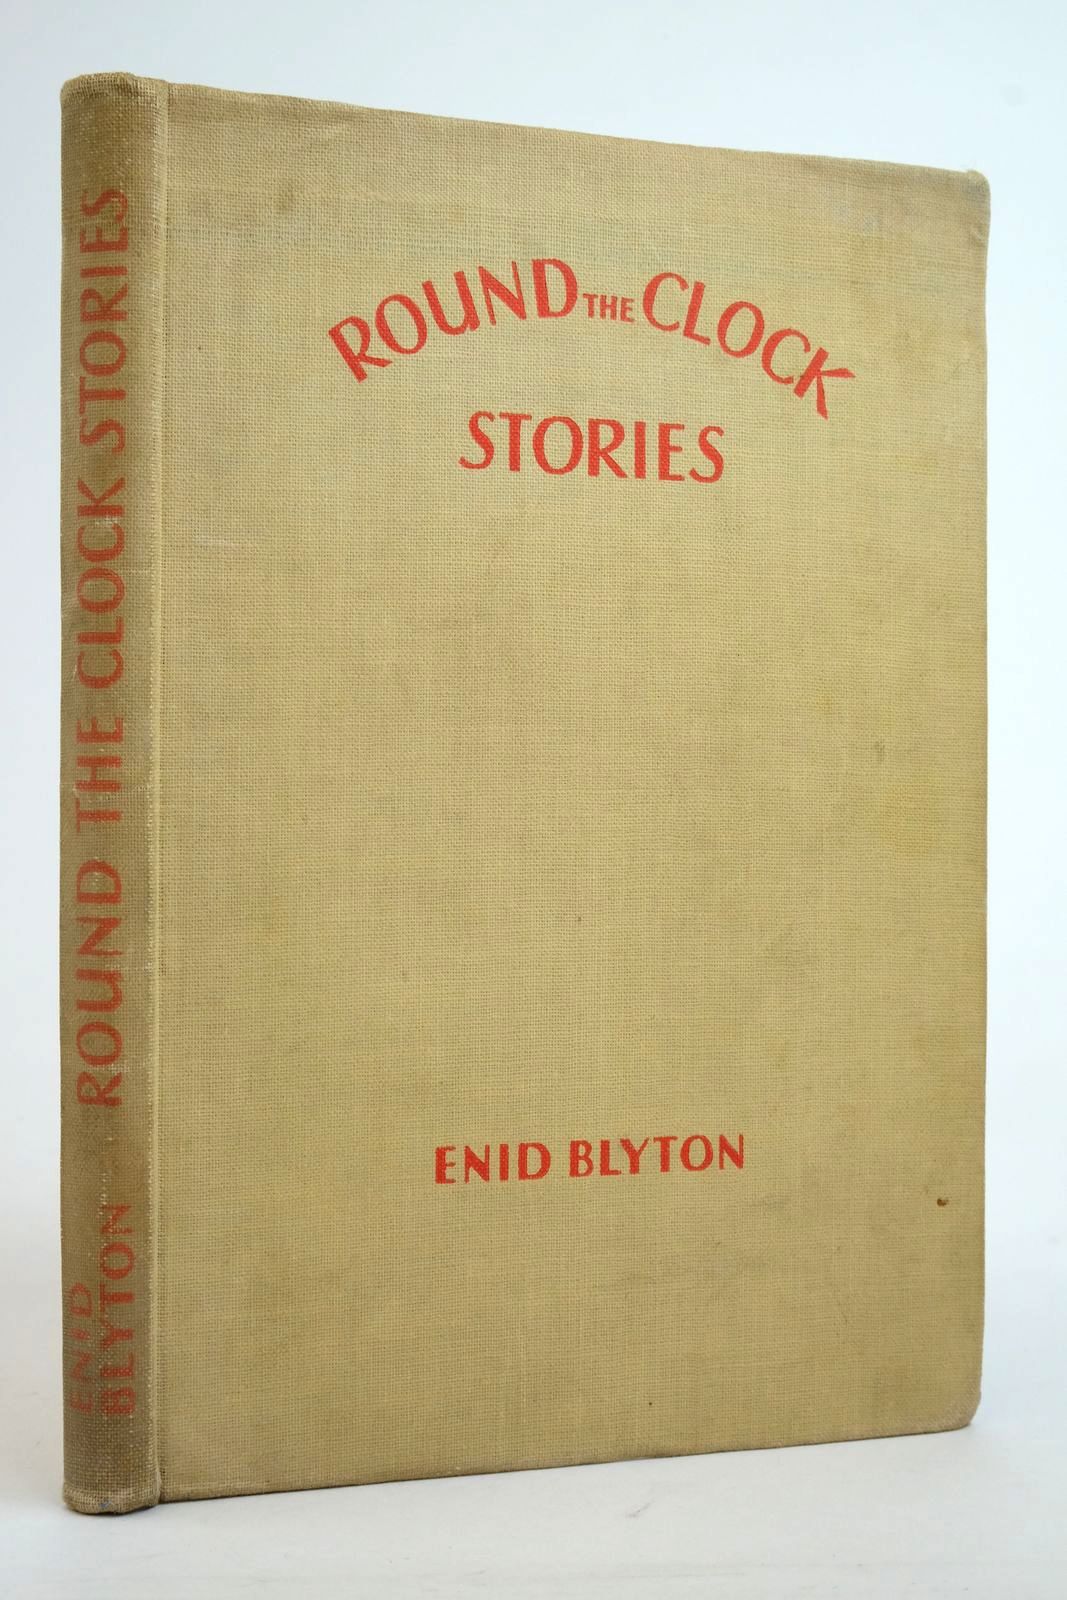 Photo of ROUND THE CLOCK STORIES written by Blyton, Enid illustrated by Unwin, Nora published by The National Magazine Co. Ltd. (STOCK CODE: 2136298)  for sale by Stella & Rose's Books